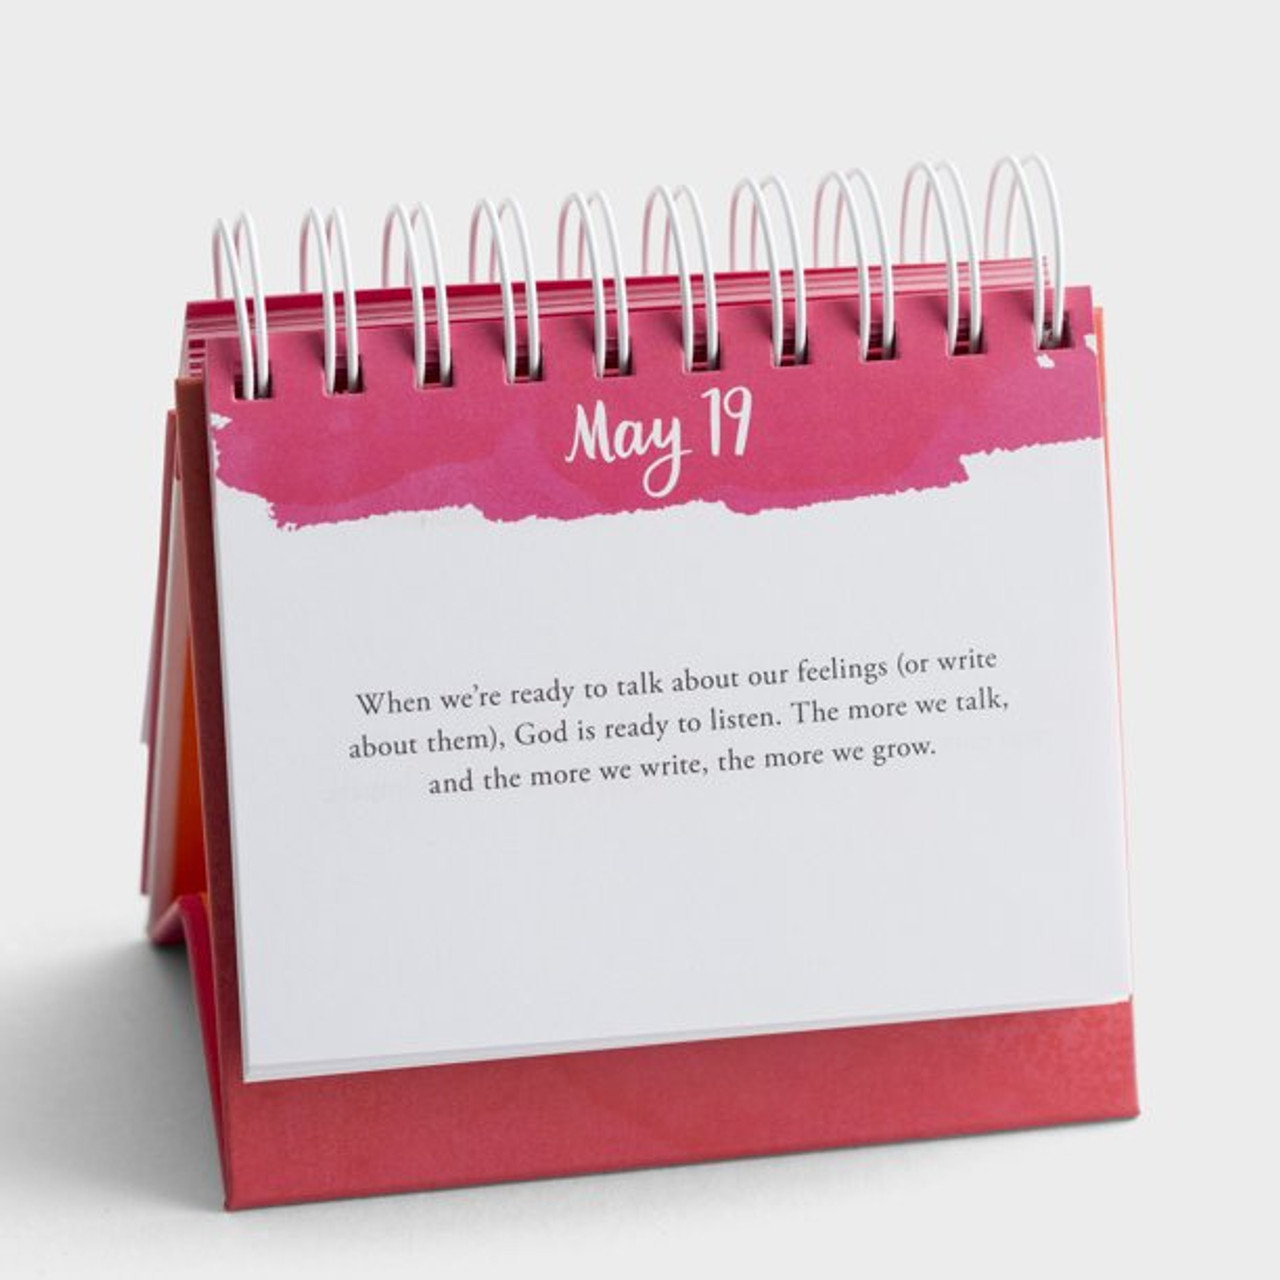 DaySpring - Shanna Noel - Falling In Love With Your Bible - 366 Day Perpetual Calendar - Daybrightener